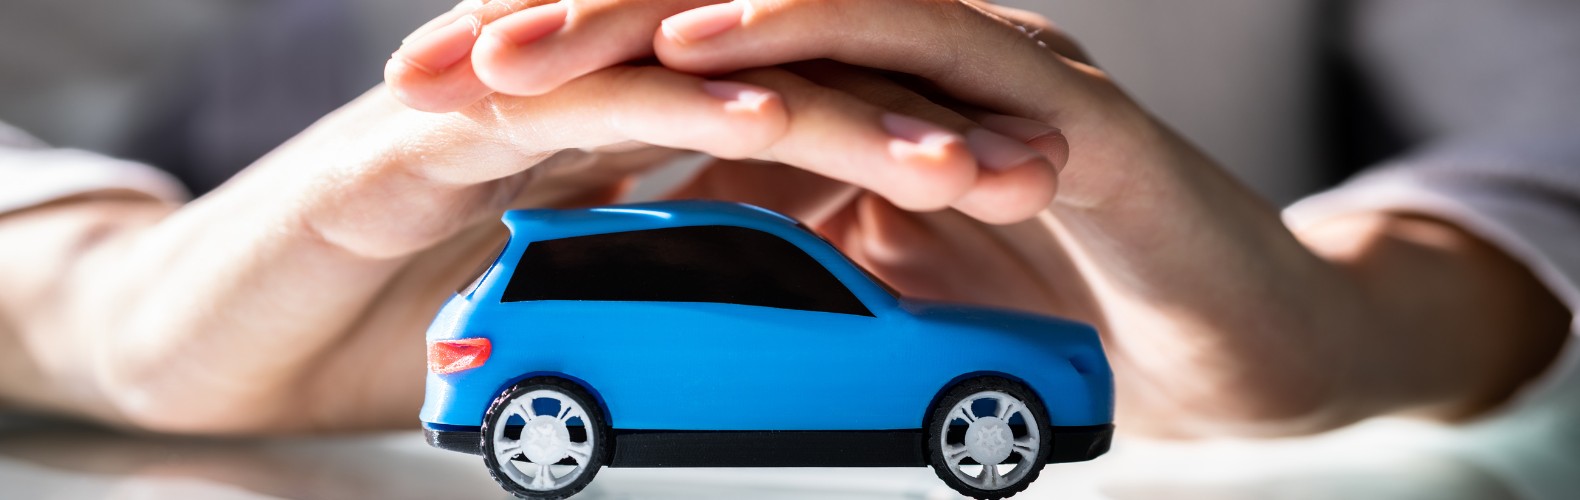 5 Vehicle Coverages to Add to your Insurance Policy